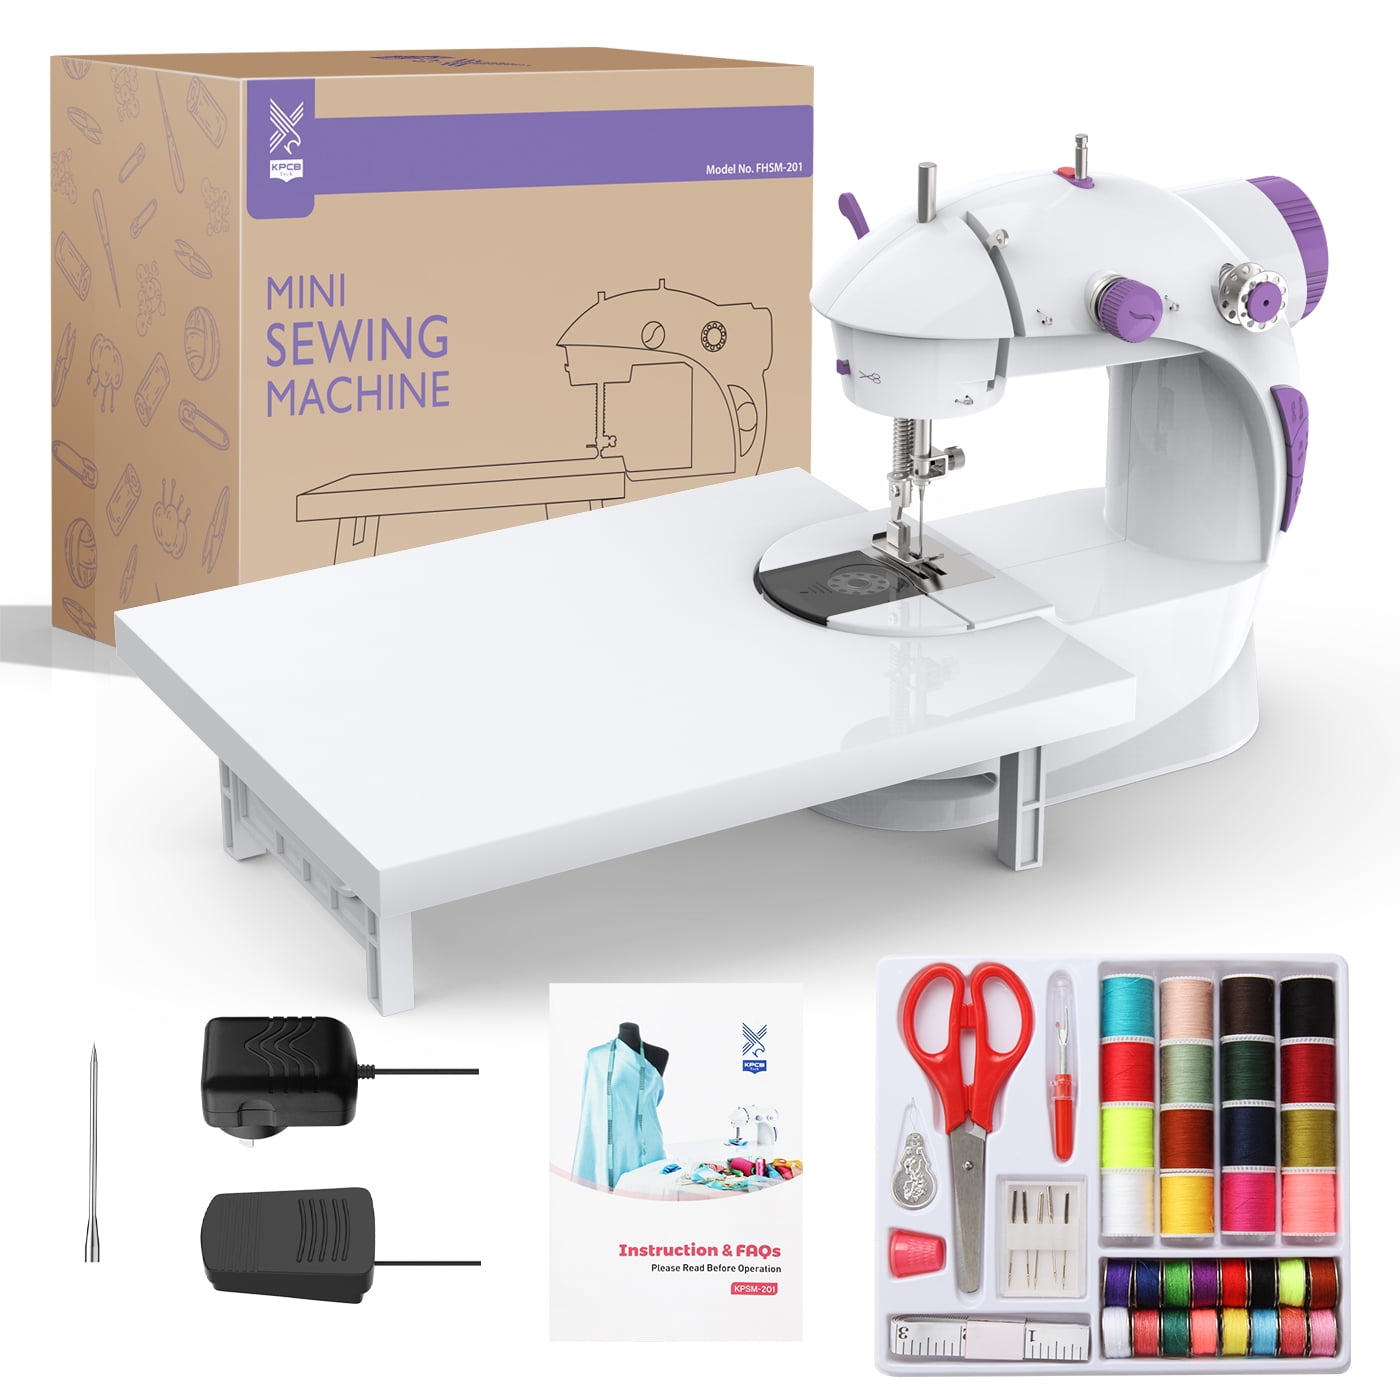 KPCB Tech 1 Kpcb Mini Sewing Machine 20 With Backstitch, Upgraded Sewing  Machines For Beginners Or Kids With Led Strip Adjustable Stitches